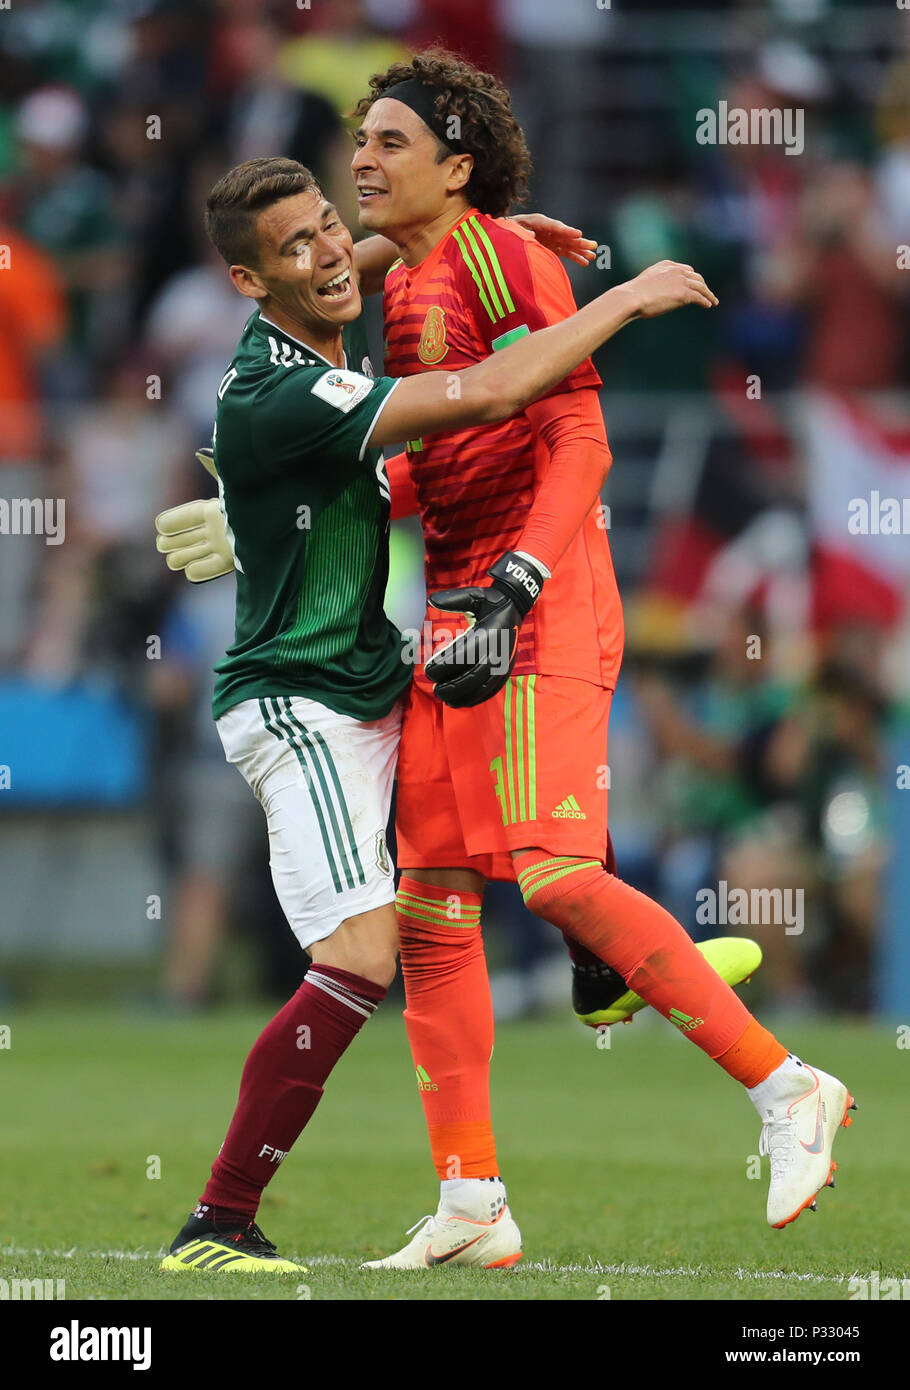 Moscow, Russia, 17 June 2018. Hector Moreno & Ochoa Guillermo GERMANY V MEXICO GERMANY V MEXICO, 2018 FIFA WORLD CUP RUSSIA 17 June 2018 GBC8220 2018 FIFA World Cup Russia STRICTLY EDITORIAL USE ONLY. If The Player/Players Depicted In This Image Is/Are Playing For An English Club Or The England National Team. Then This Image May Only Be Used For Editorial Purposes. No Commercial Use. The Following Usages Areso Restricted EVEN IF IN AN EDITORIAL CONTEXT: Use in conjuction with, or part of, any unauthorized audio, video, data, fixture lists, club/league logos, Betting, Games or any 'live' ser Cr Stock Photo